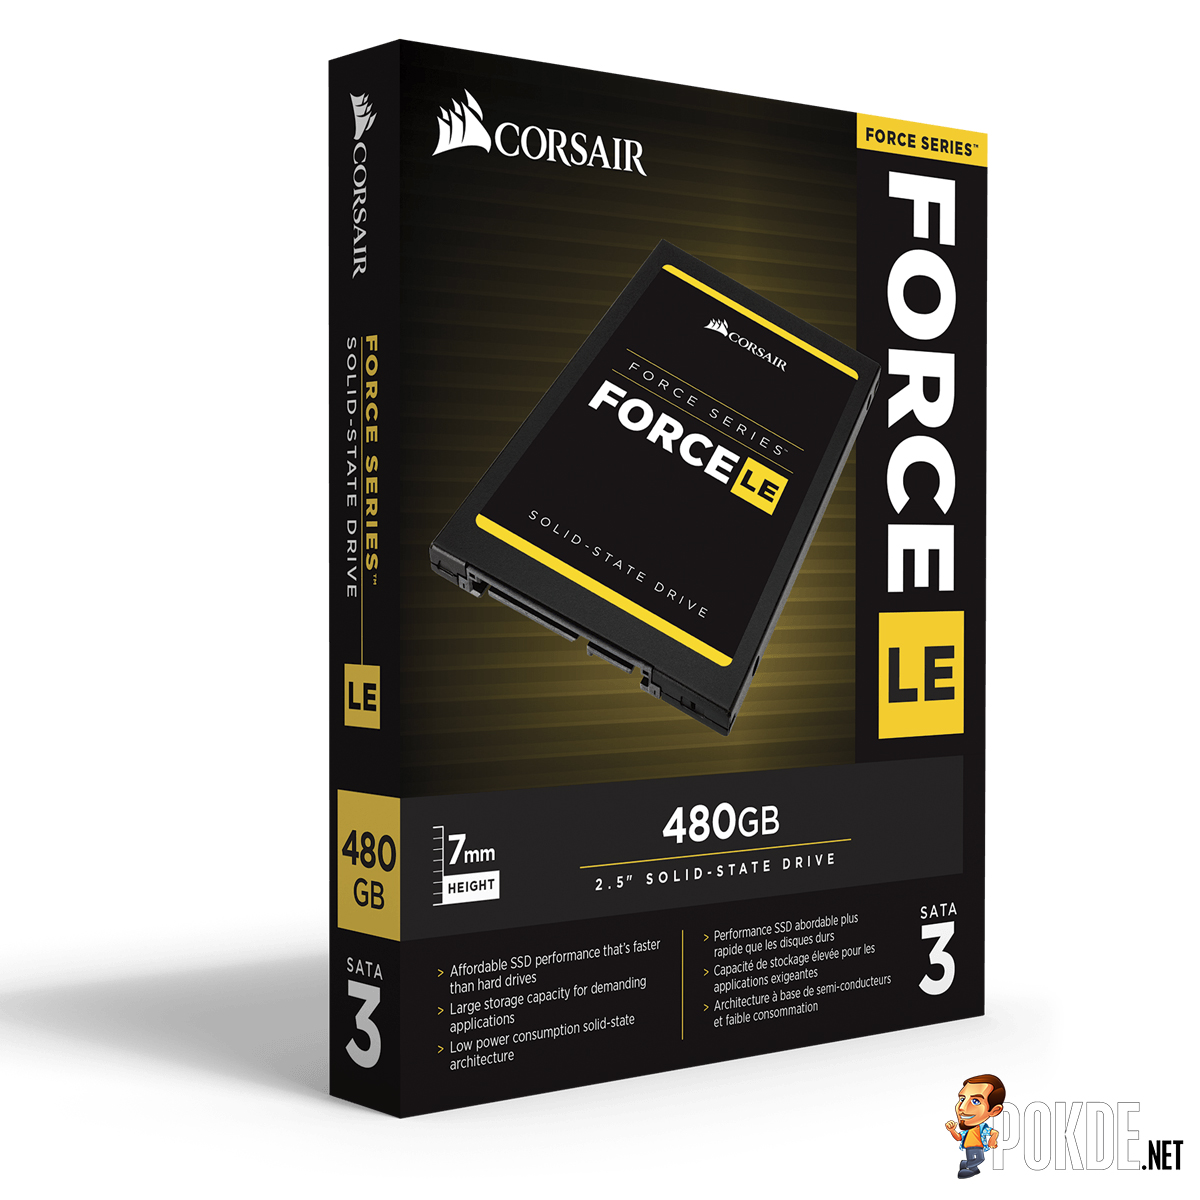 Corsair Force LE SSD is now available in Malaysia 26